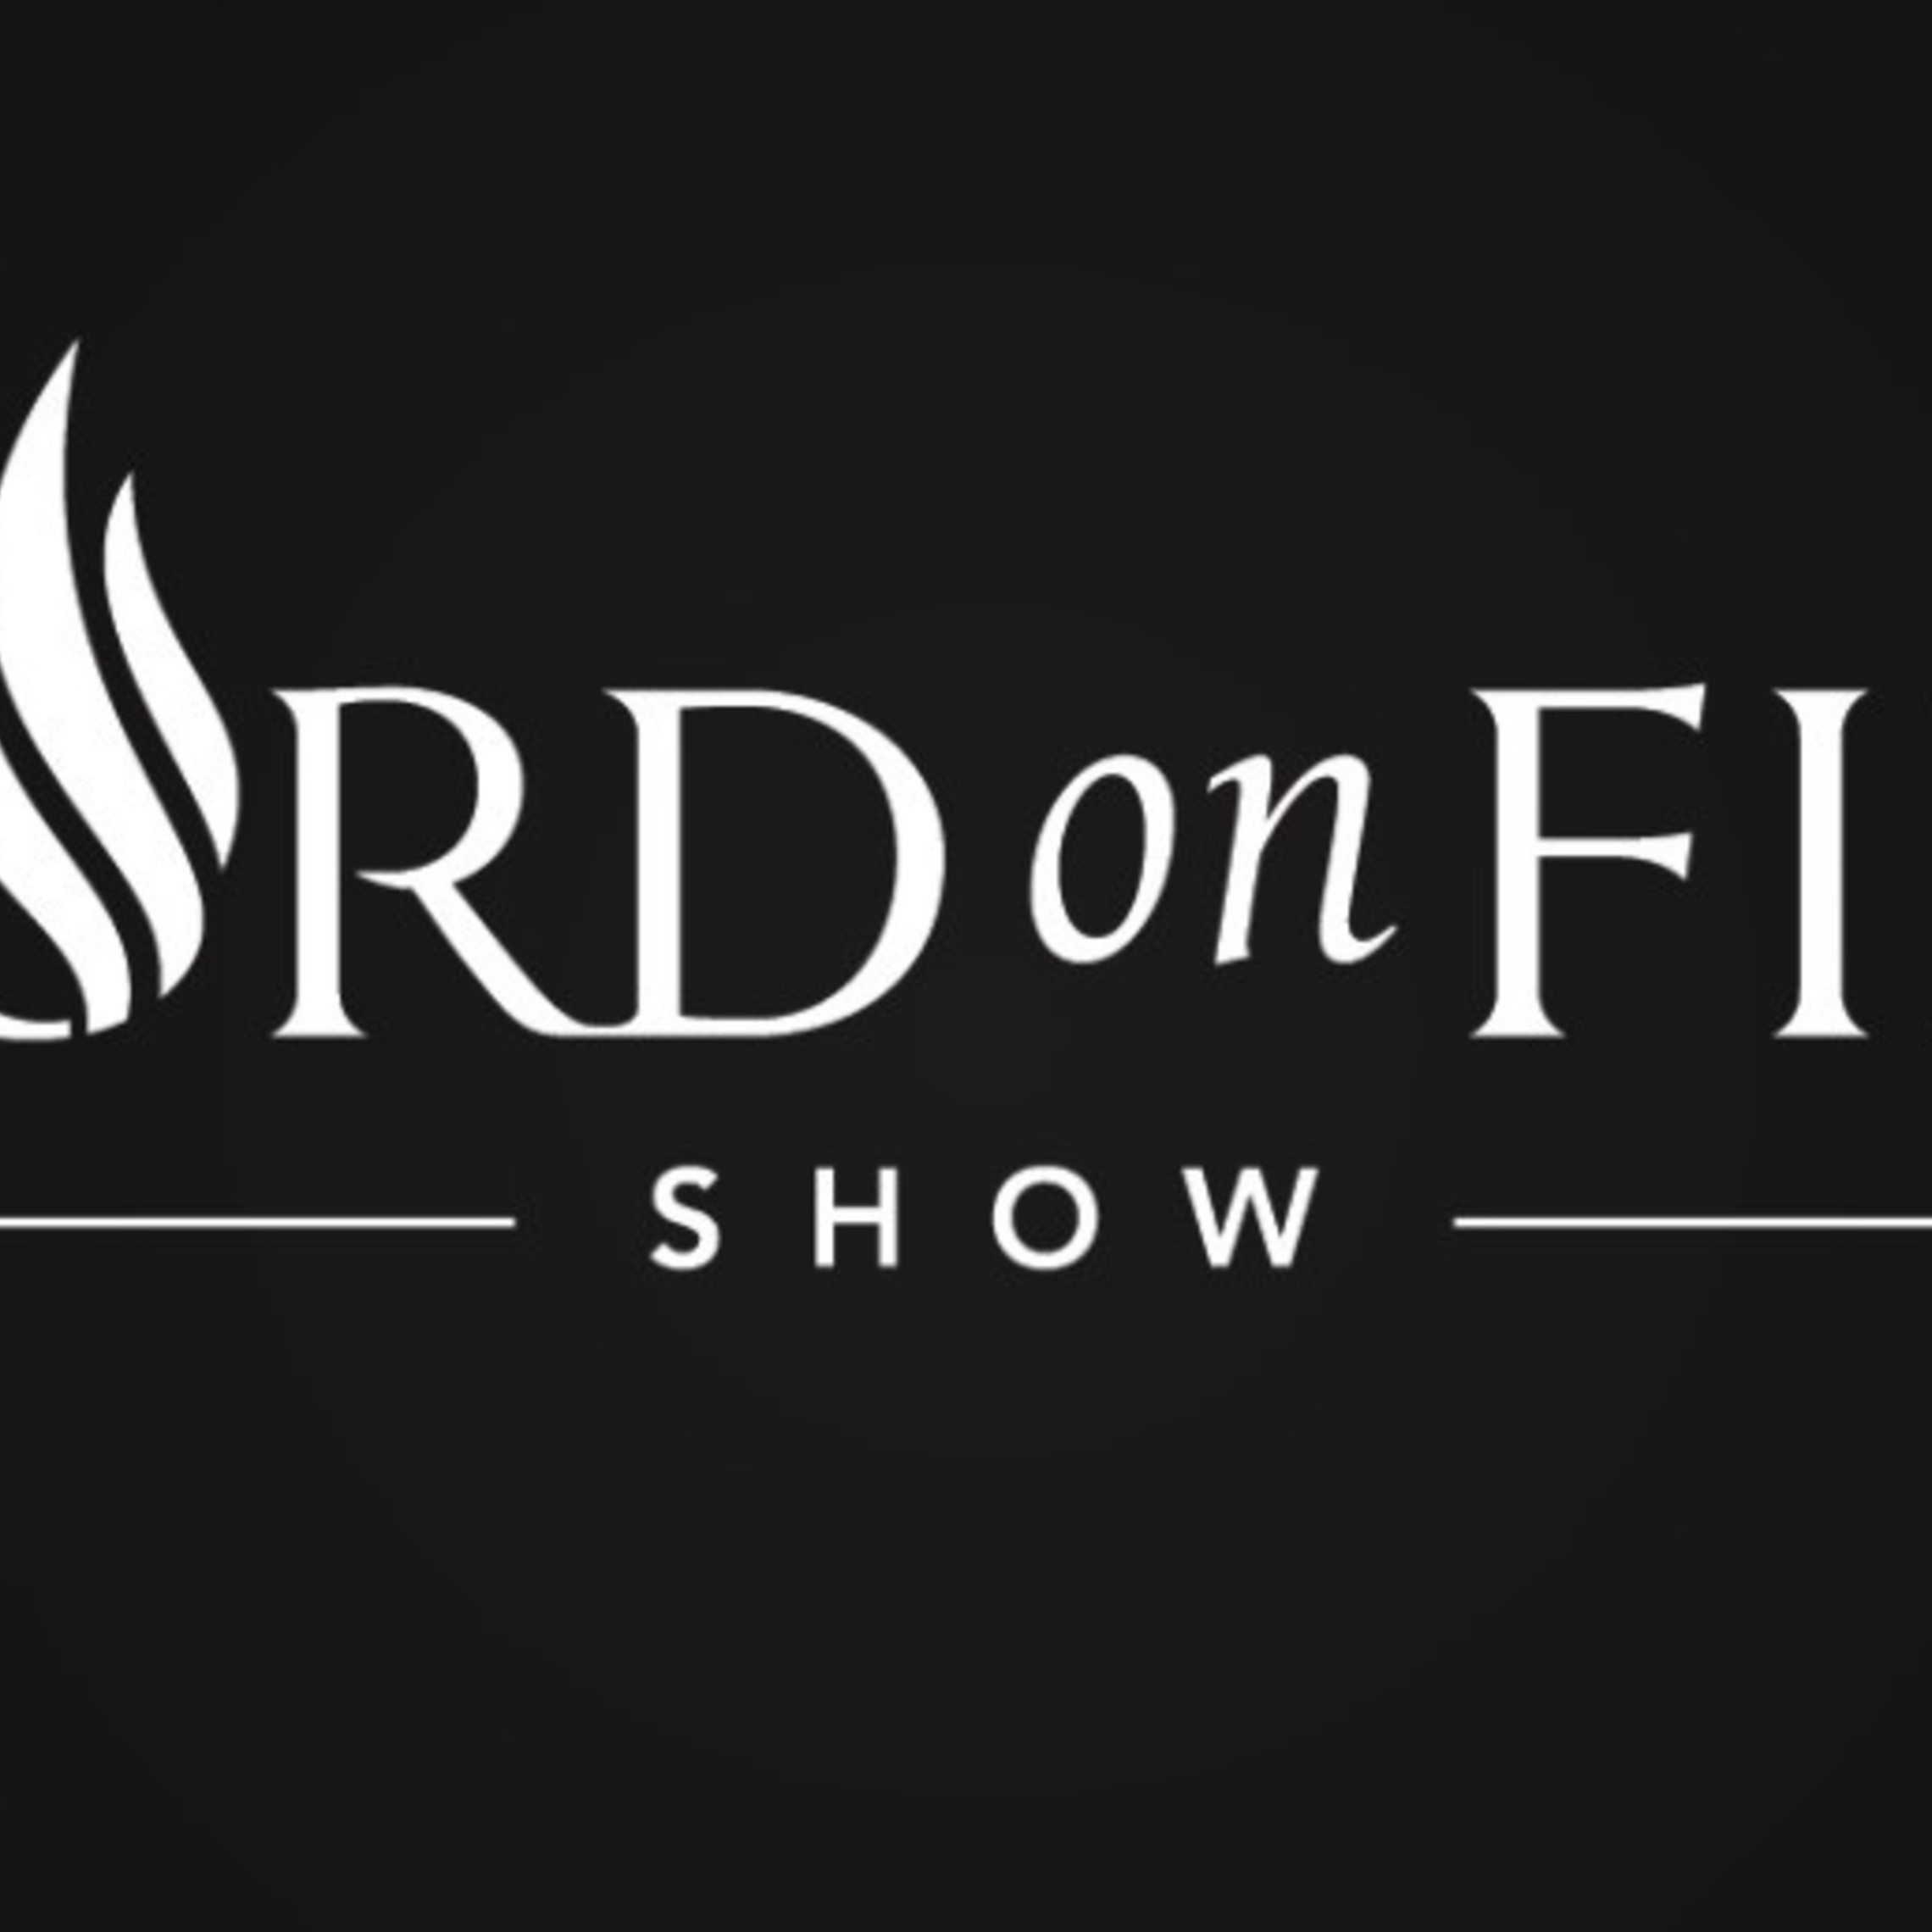 Word On Fire Show